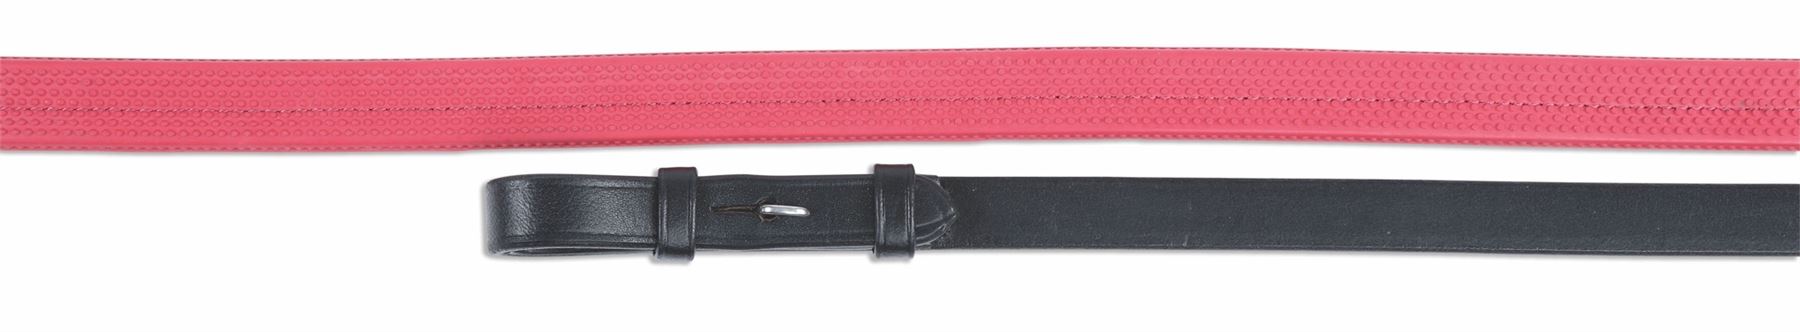 Shires Aviemore Nylon Insert Rubber Grip Reins - Just Horse Riders